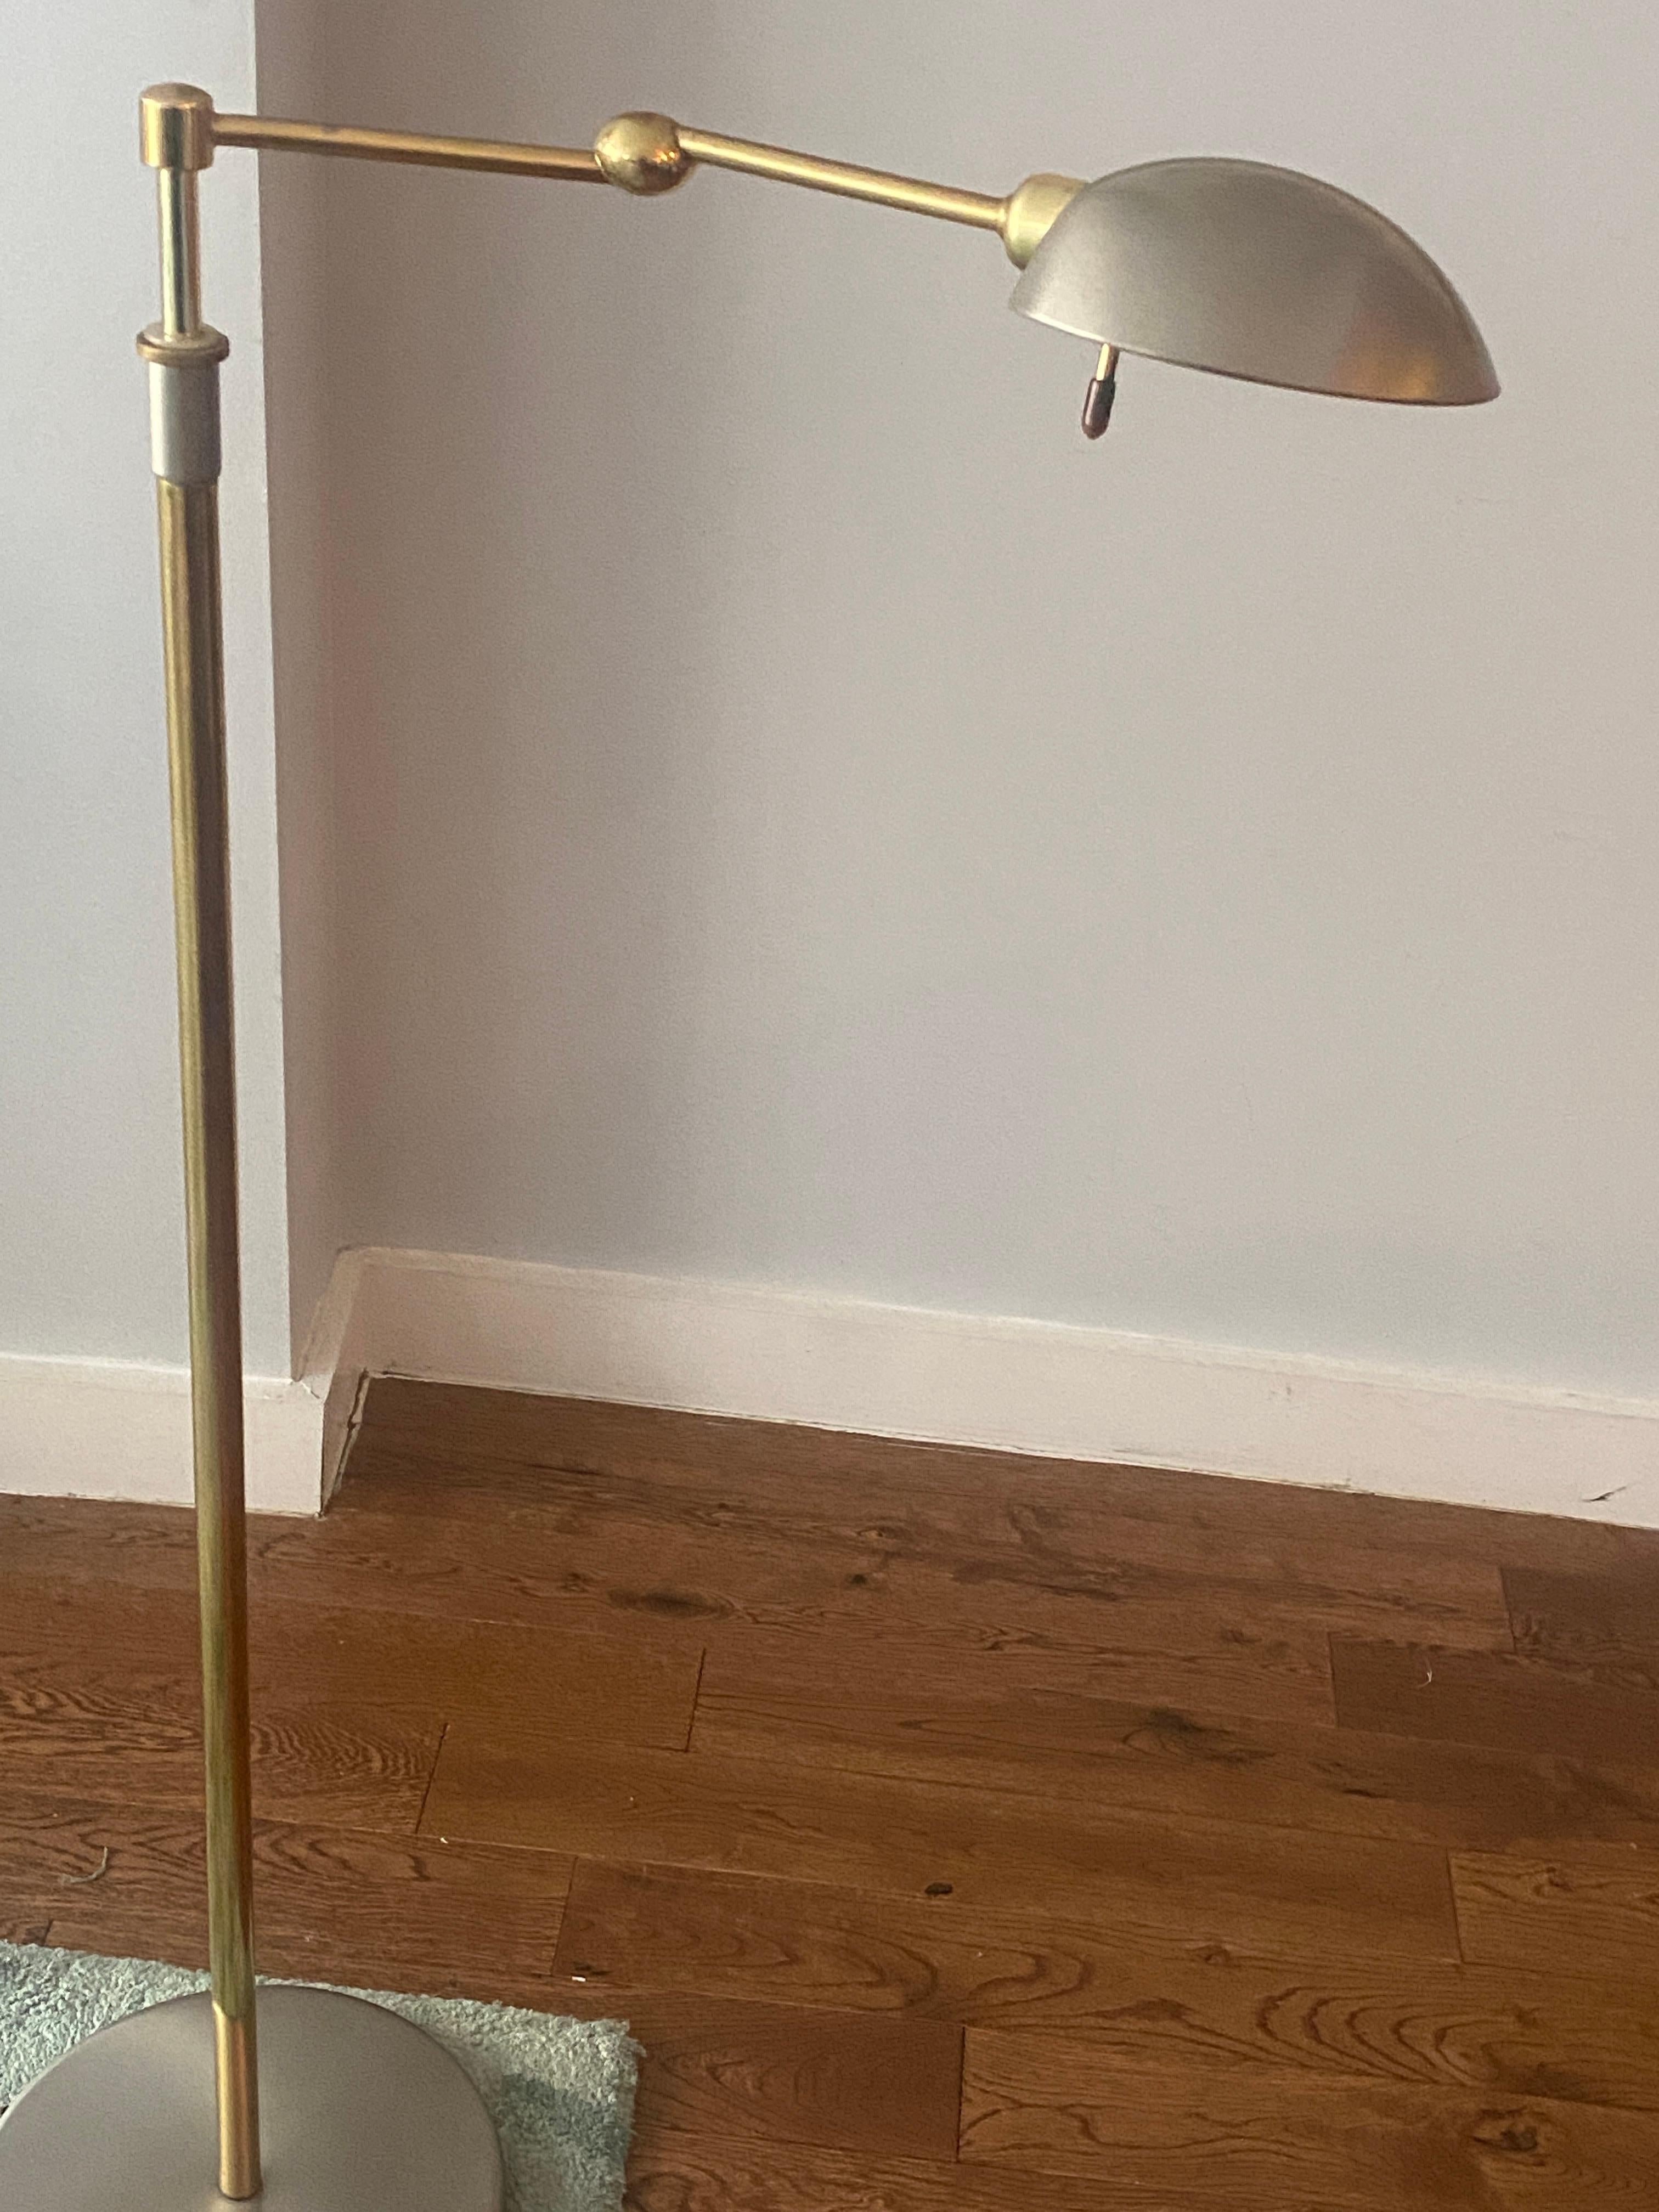 Holtkoetter Halogen Swing-Arm Floor Lamp No. 2508/1*P1  made with  beautifully manufactured brass with the latest in dimming technology. Partially brushed brass and partially satin finish makes it even more unique. Soft On - a single 